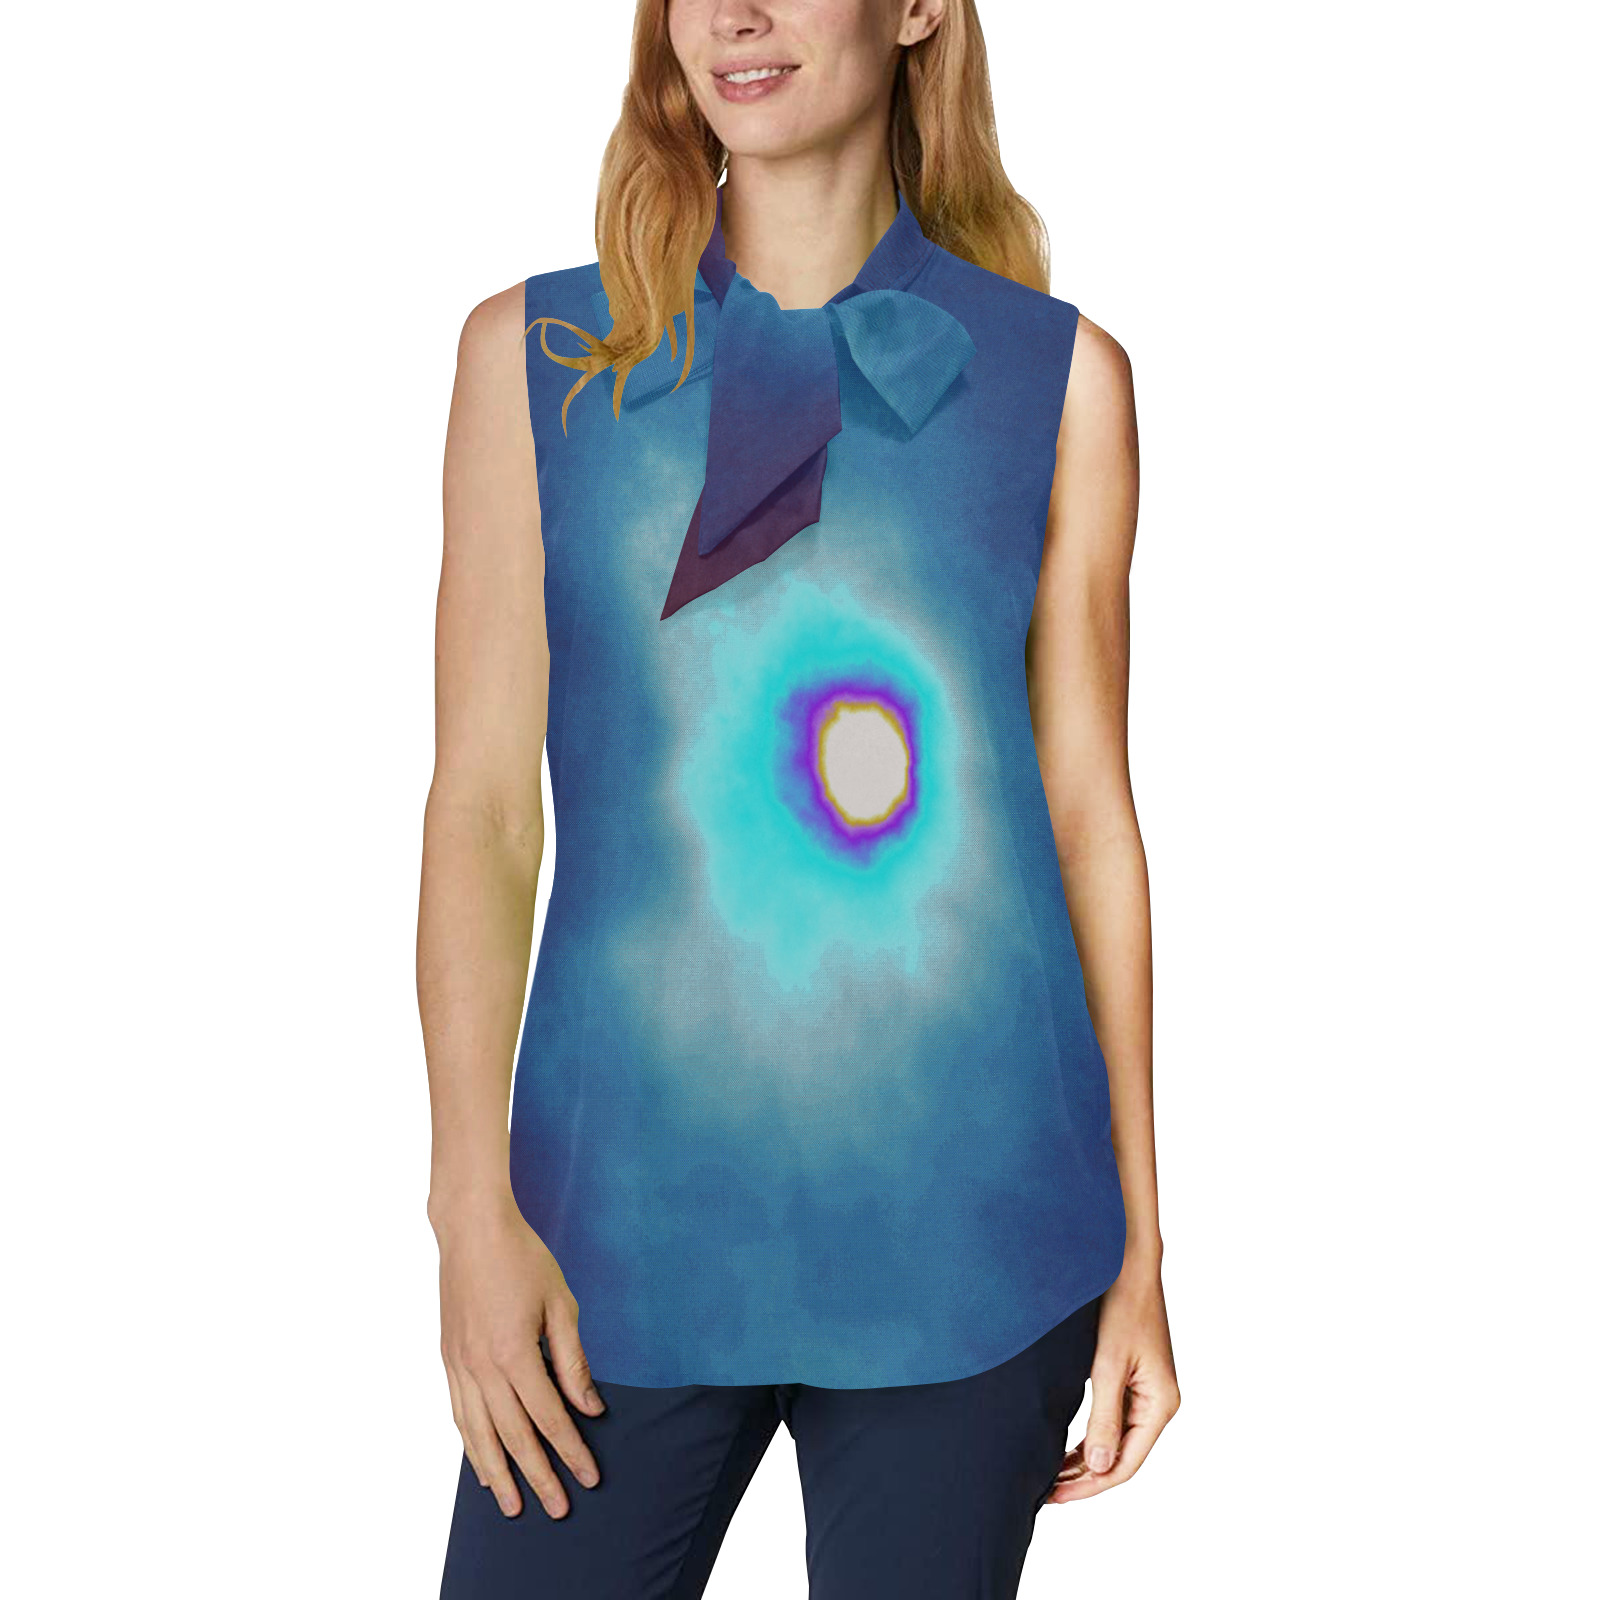 Dimensional Eclipse In The Multiverse 496222 Women's Bow Tie V-Neck Sleeveless Shirt (Model T69)